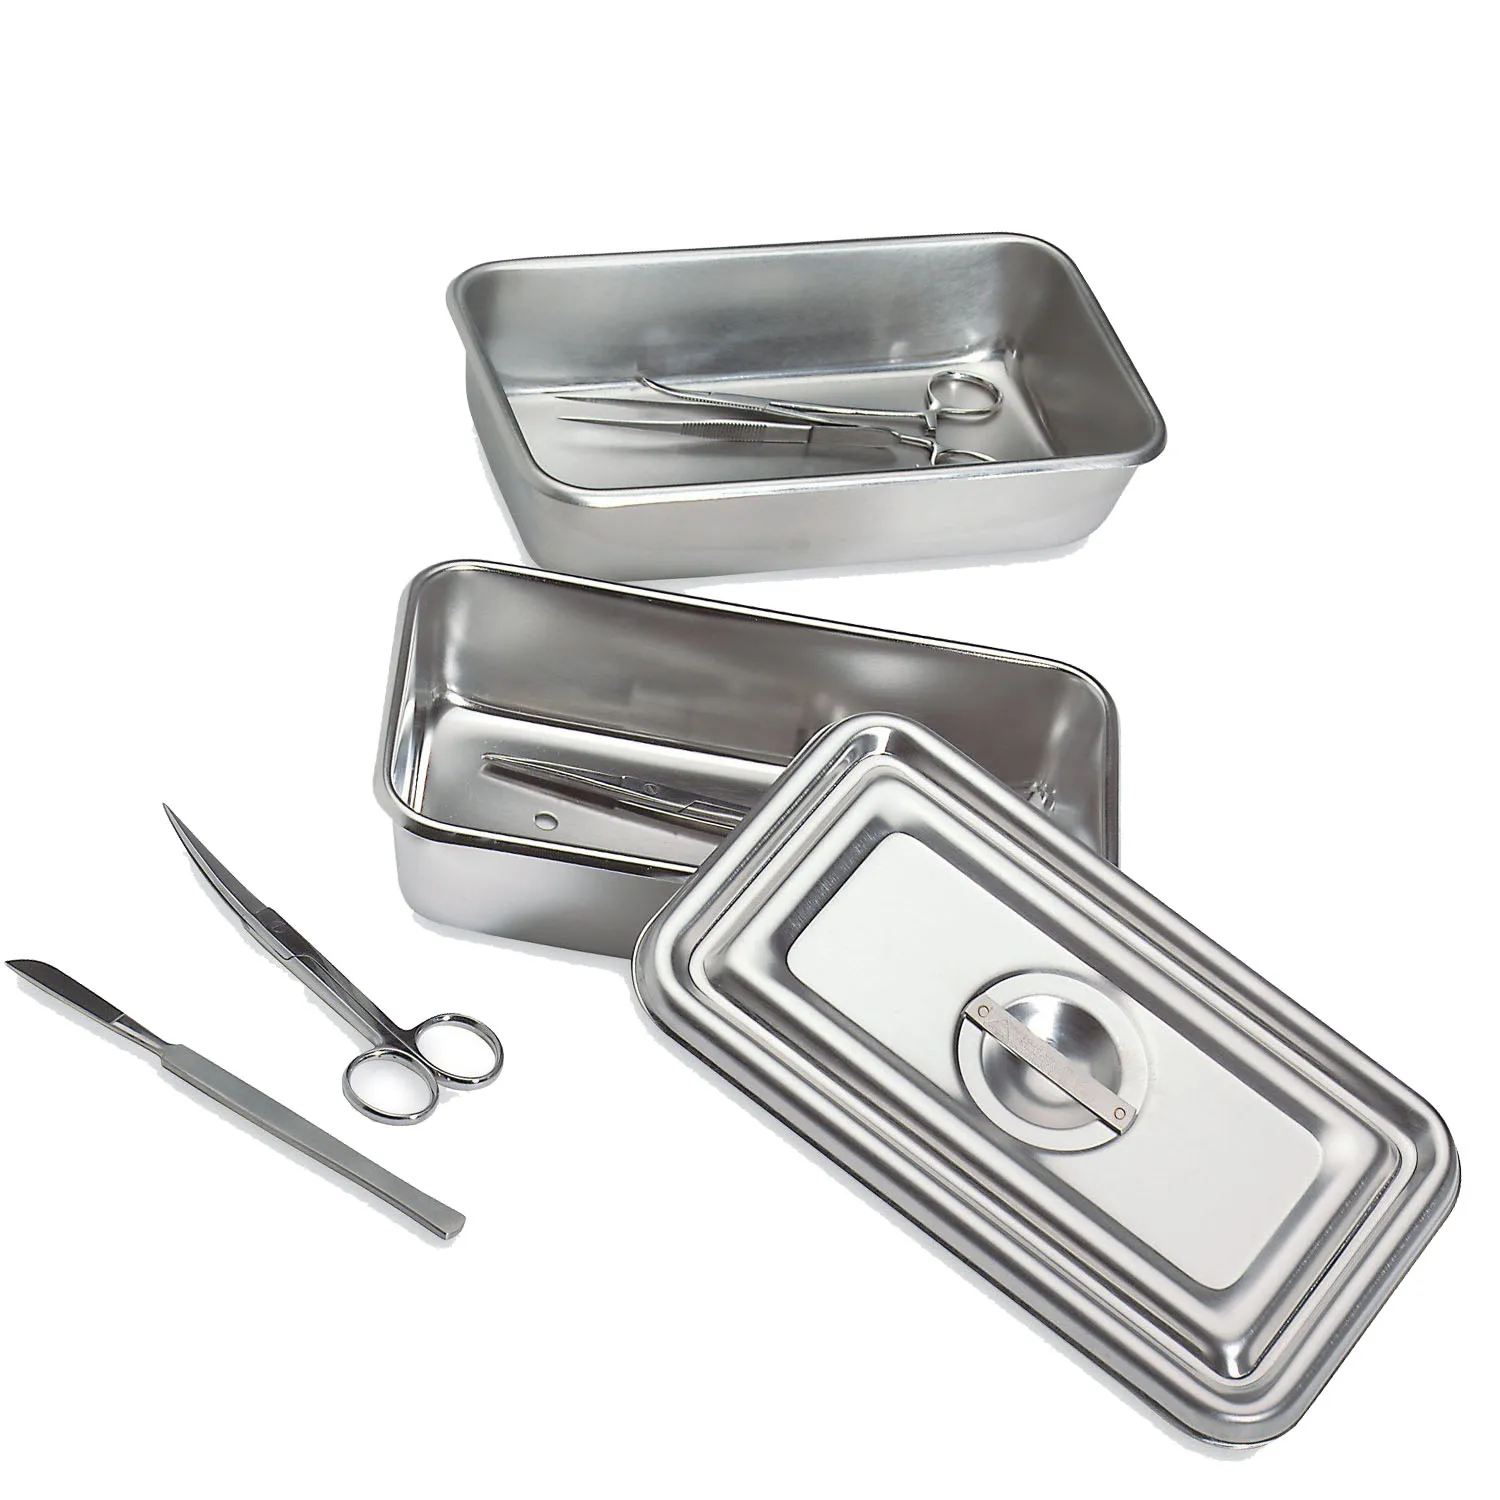 Surgical  Vet  Stainless Steel Instrument Tray 8" x 6" x 2" with Lid  CE New 